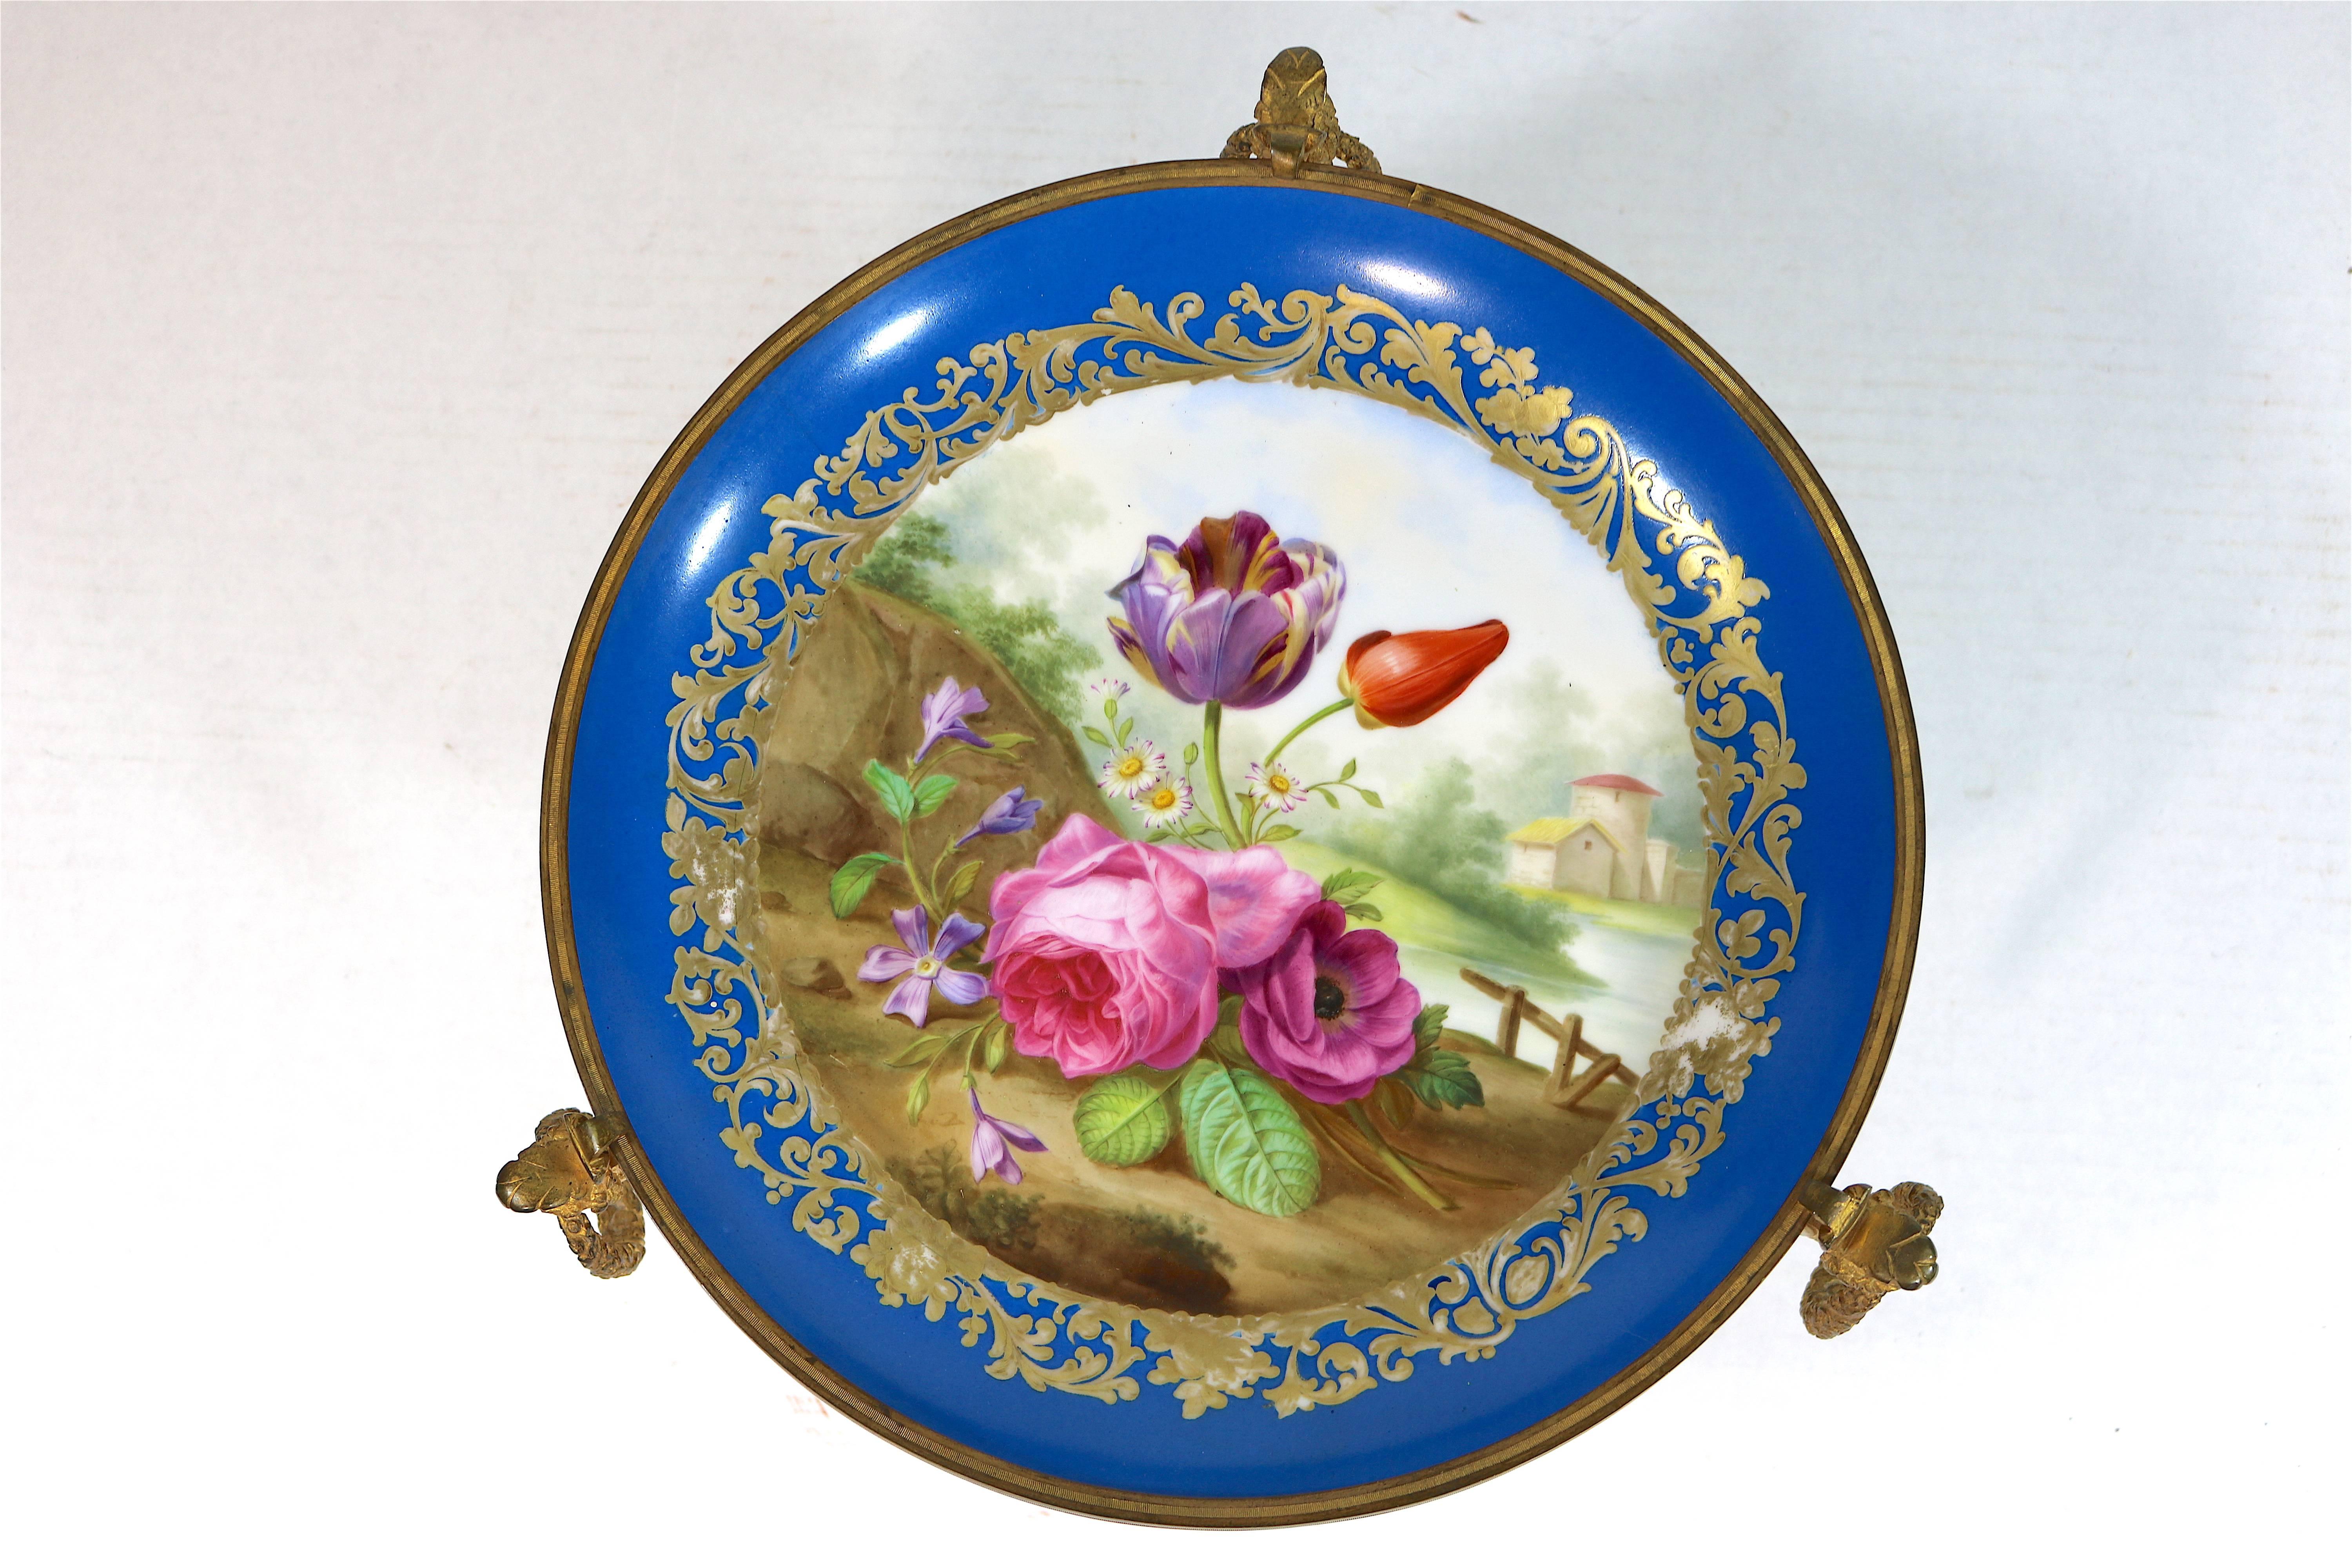 19th Century Extraordinary 1846 Sevres Chateau des Tuileries Ormolu Porcelain Compote Server For Sale